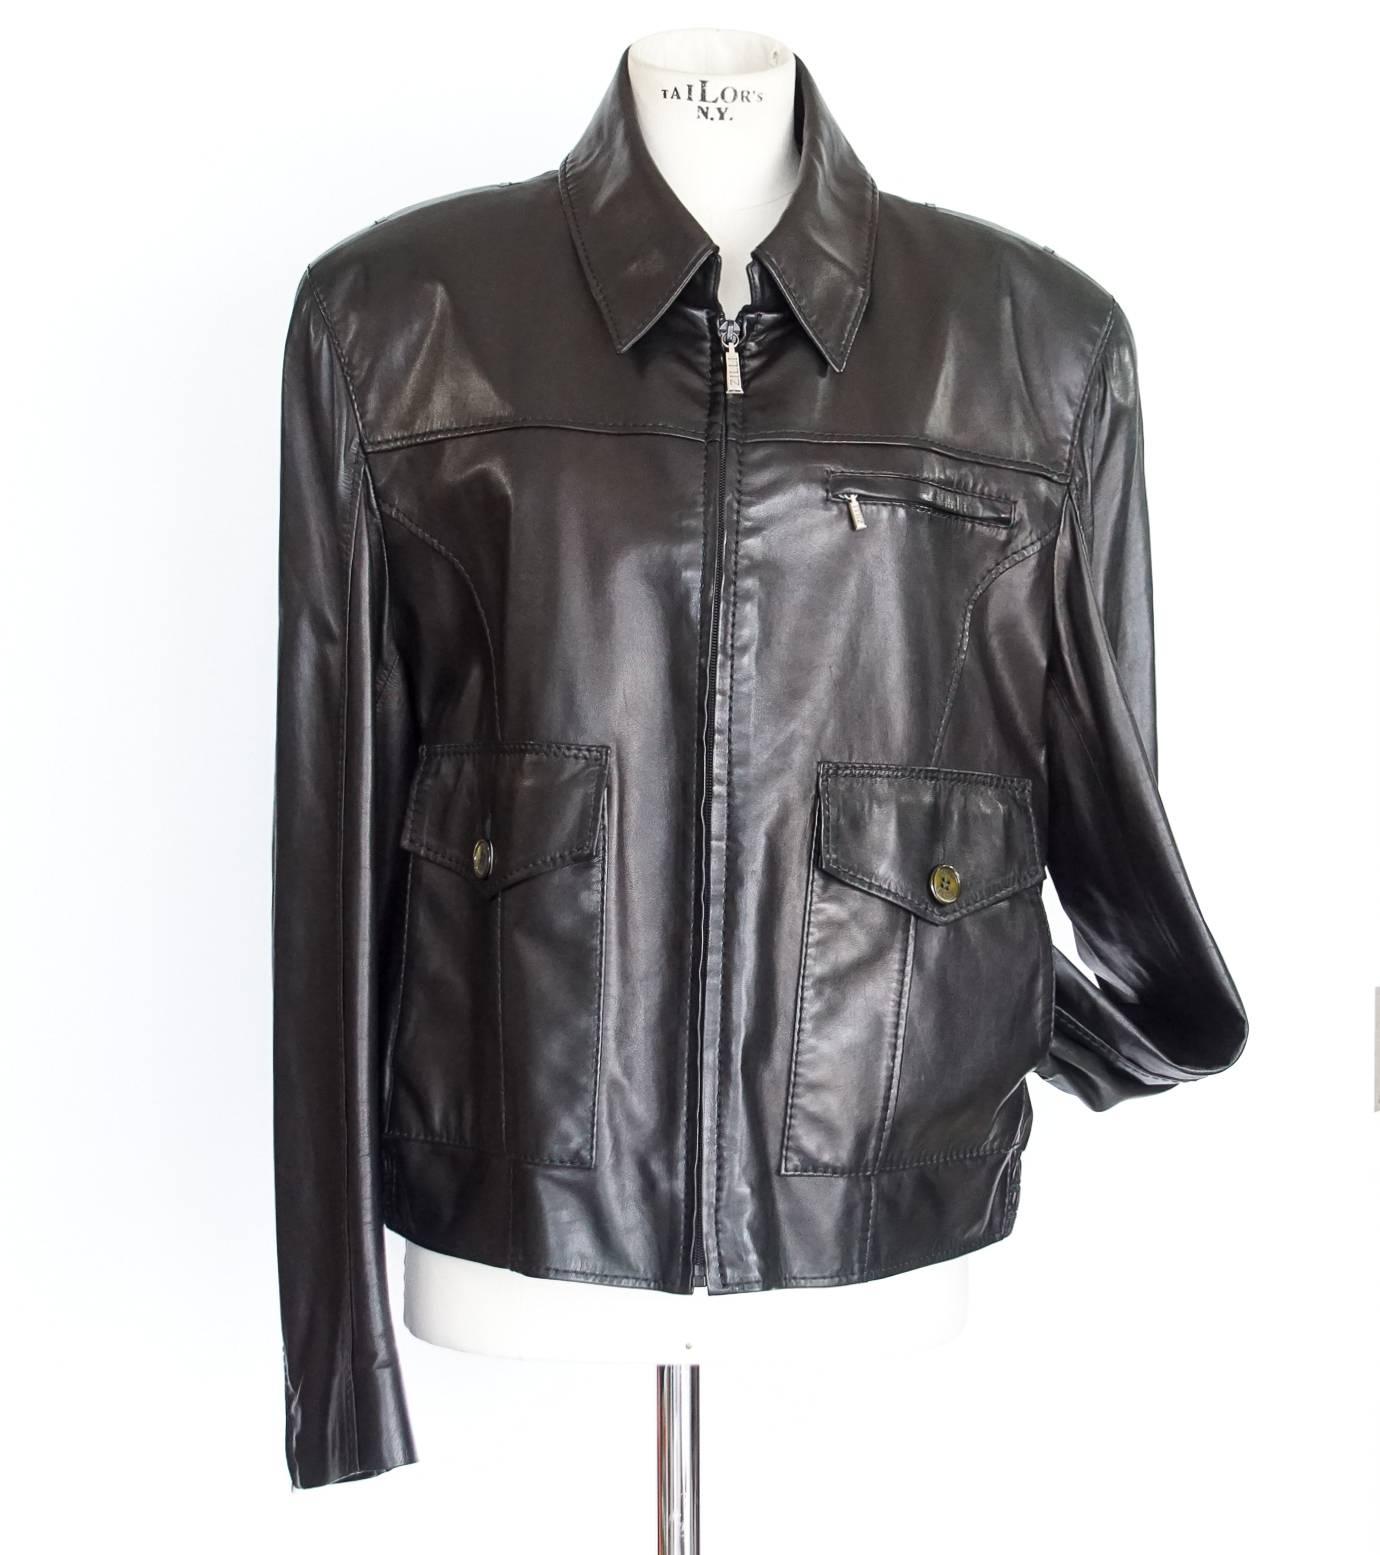 Guaranteed authentic Zilli men's jacket in the most soft, light weight Lambskin leather imaginable.  
Remarkable workmanship and fabric quality sets this label apart.
Collar hidden zipper unzips to a mandarin style.
Hidden zippers at cuffs, breast